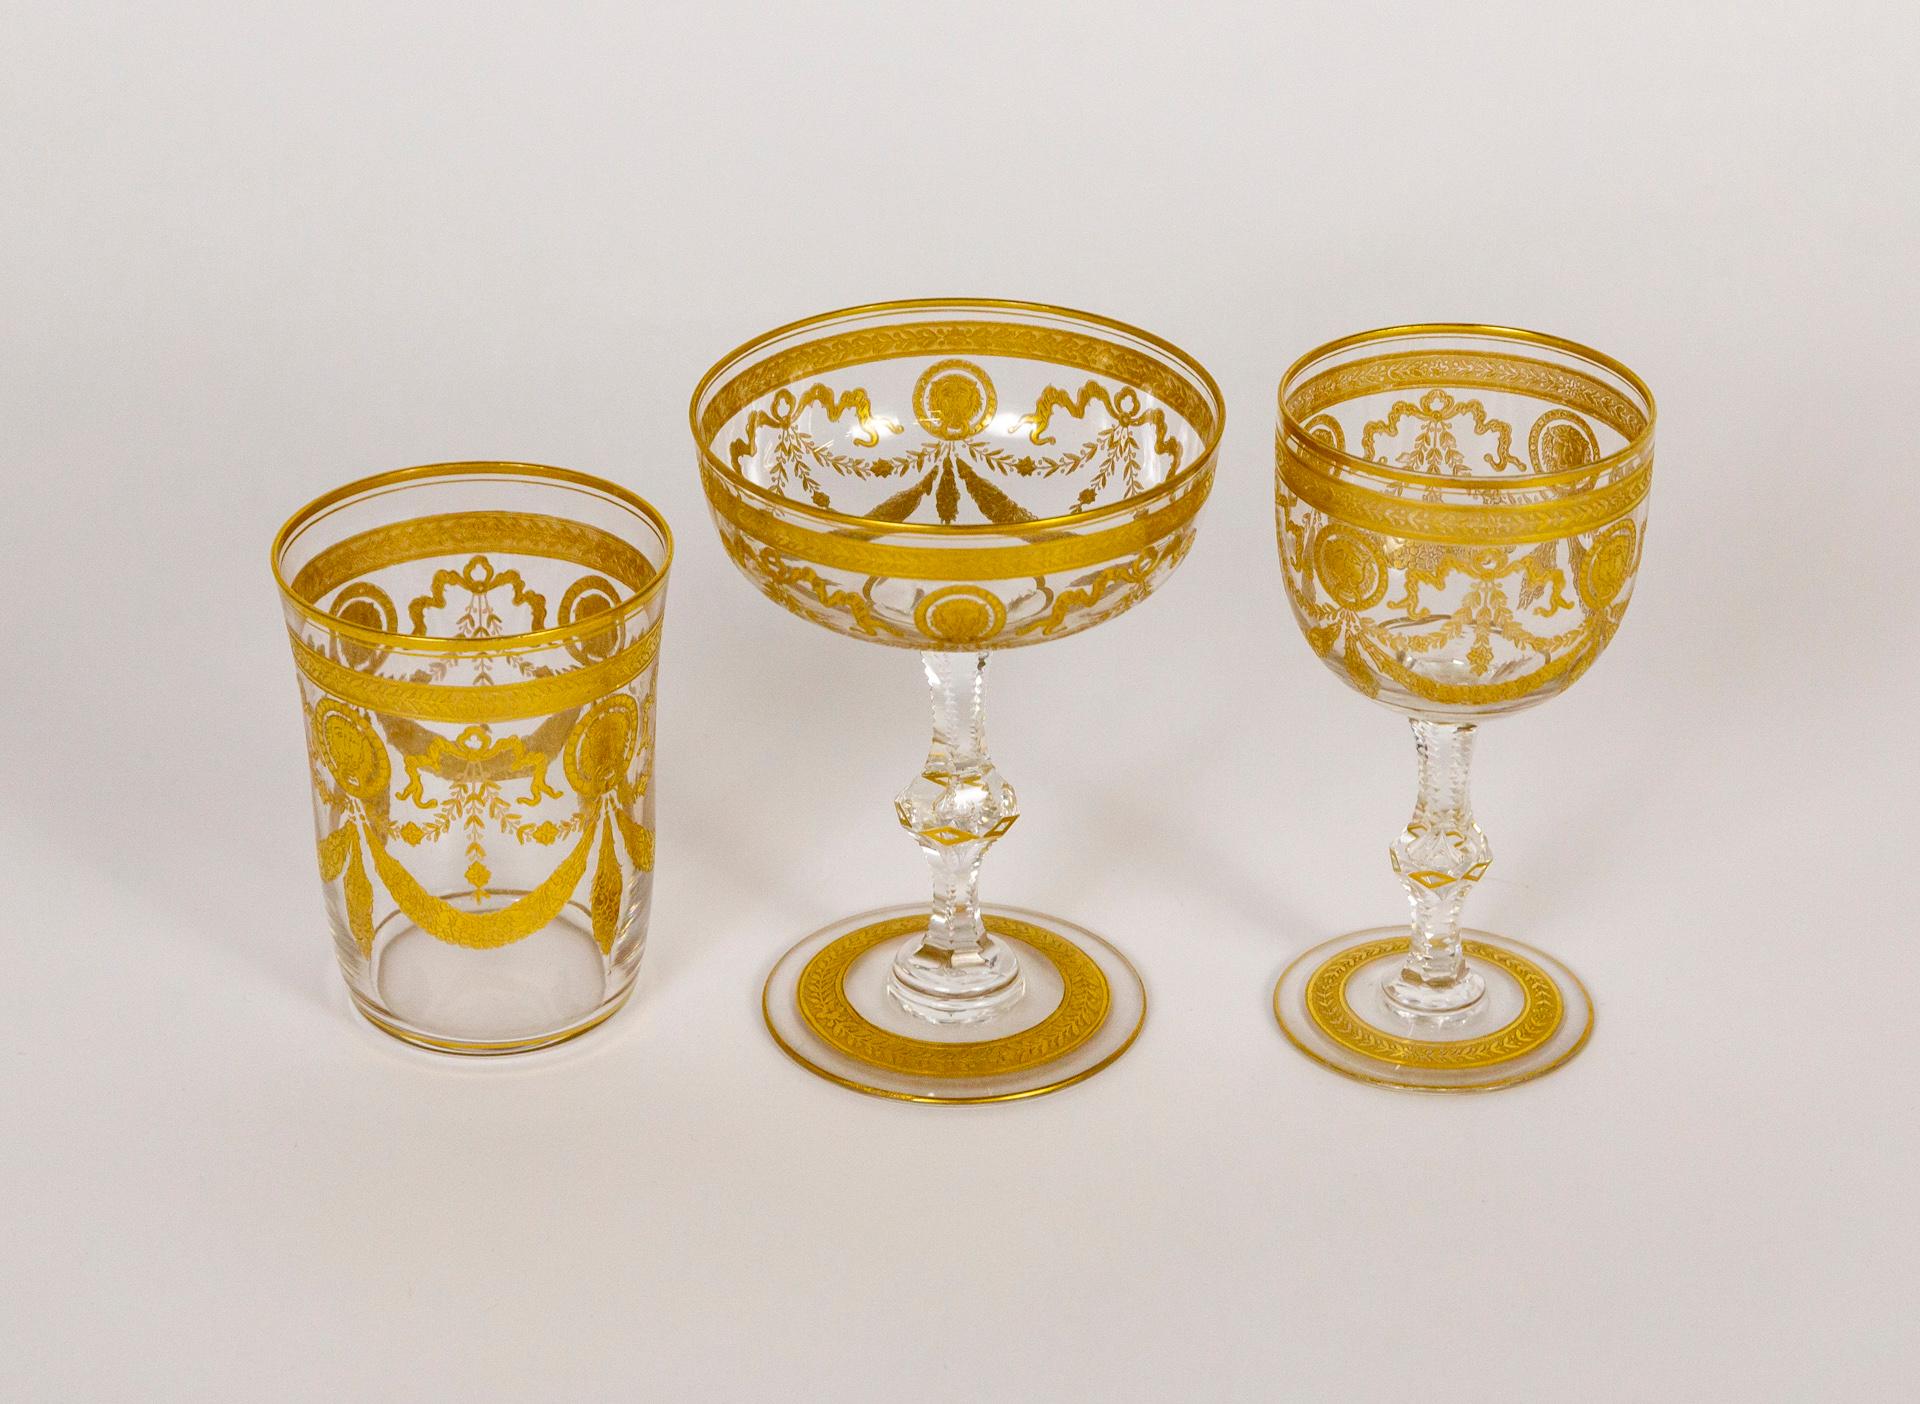 Congress Style Gilt Crystal Coupe Champagne Glasses by Saint-Louis, Set of 4 For Sale 6